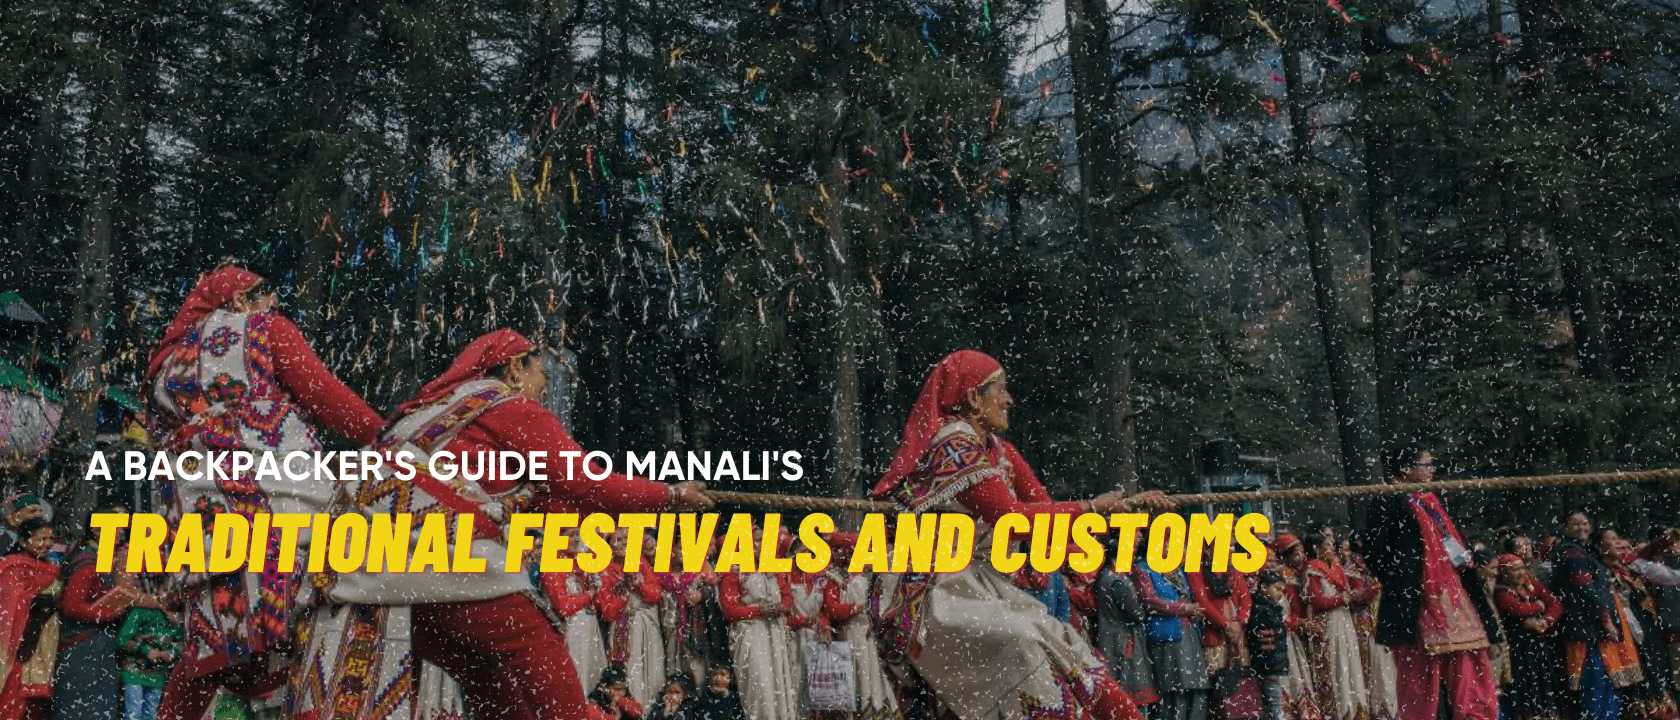 A Backpacker’s Guide to Manali’s Traditional Festivals and Customs